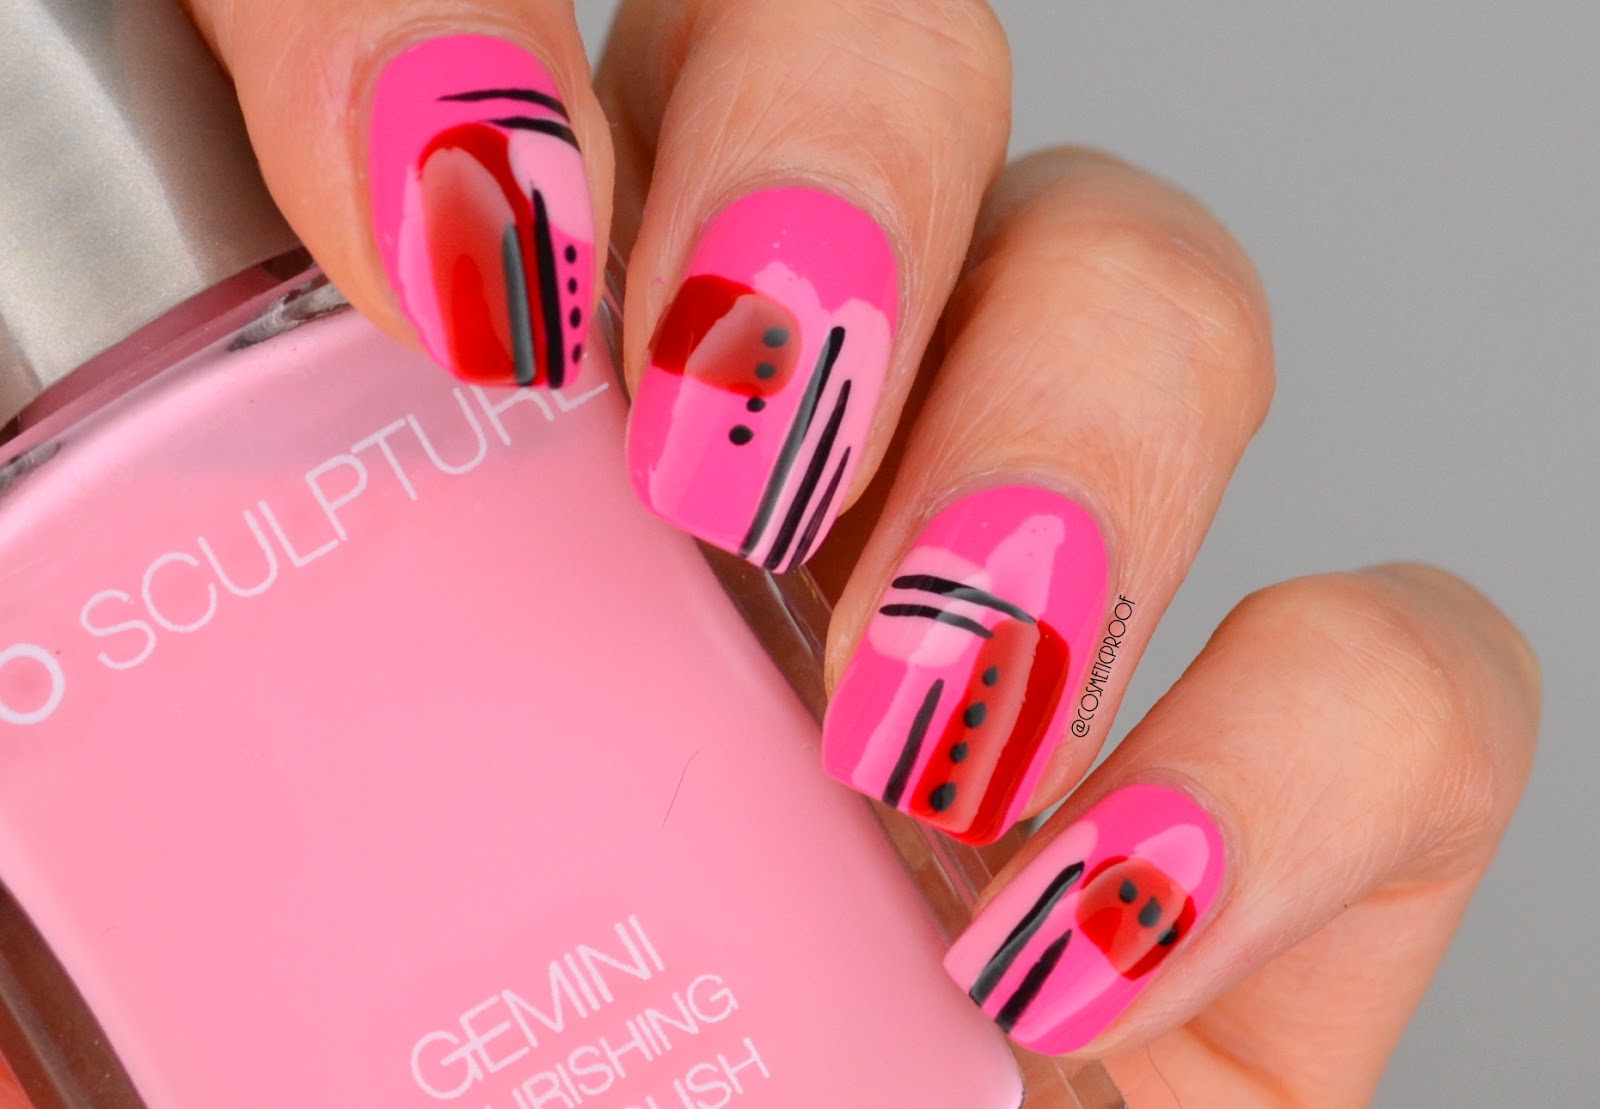 3. Colorful Abstract Nails - wide 9